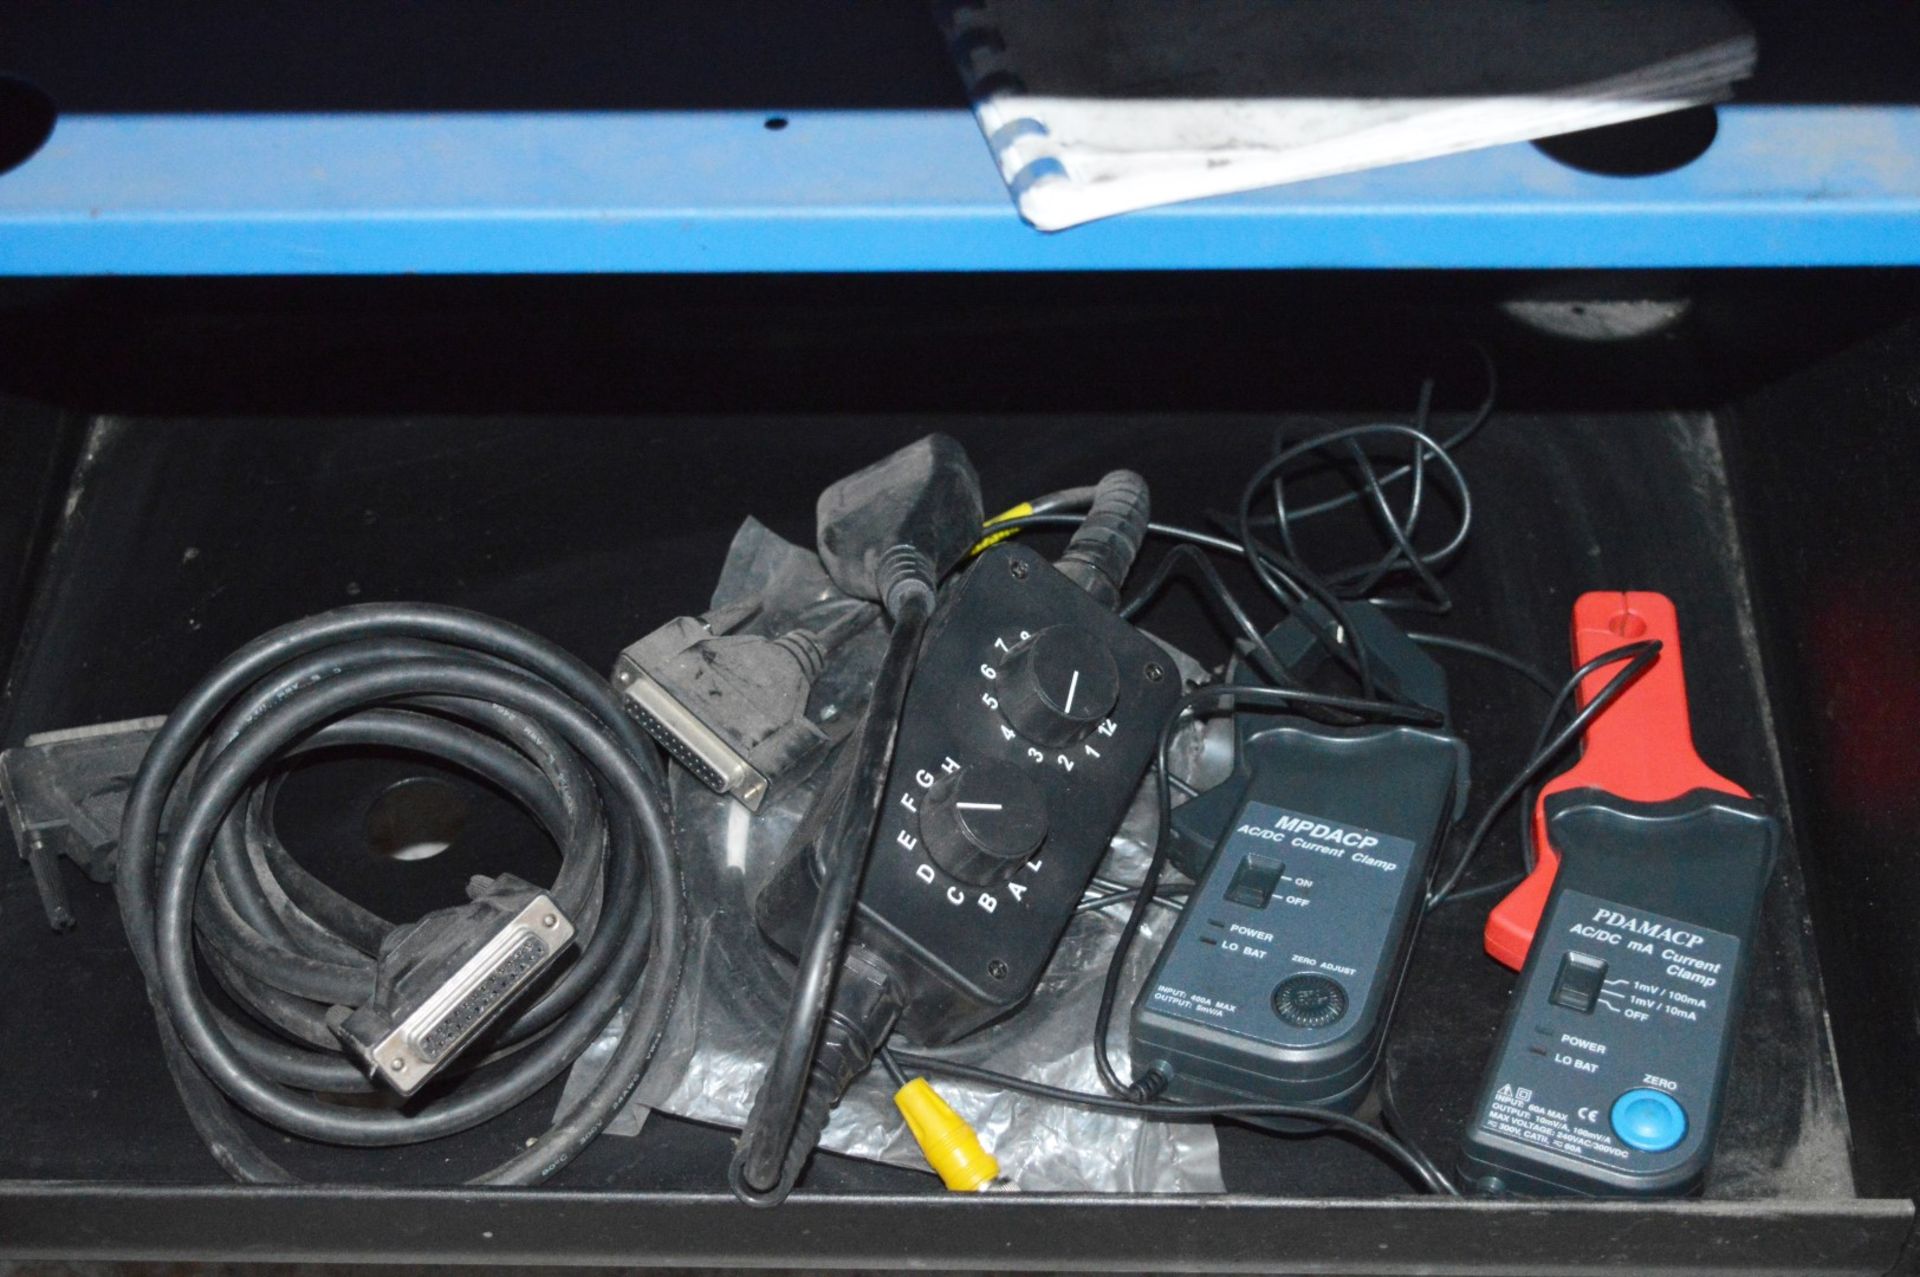 1 x Omitec OmiTechCenter Automotive Diagnostic Workstation - Please View The Pictures Provided - - Image 2 of 21